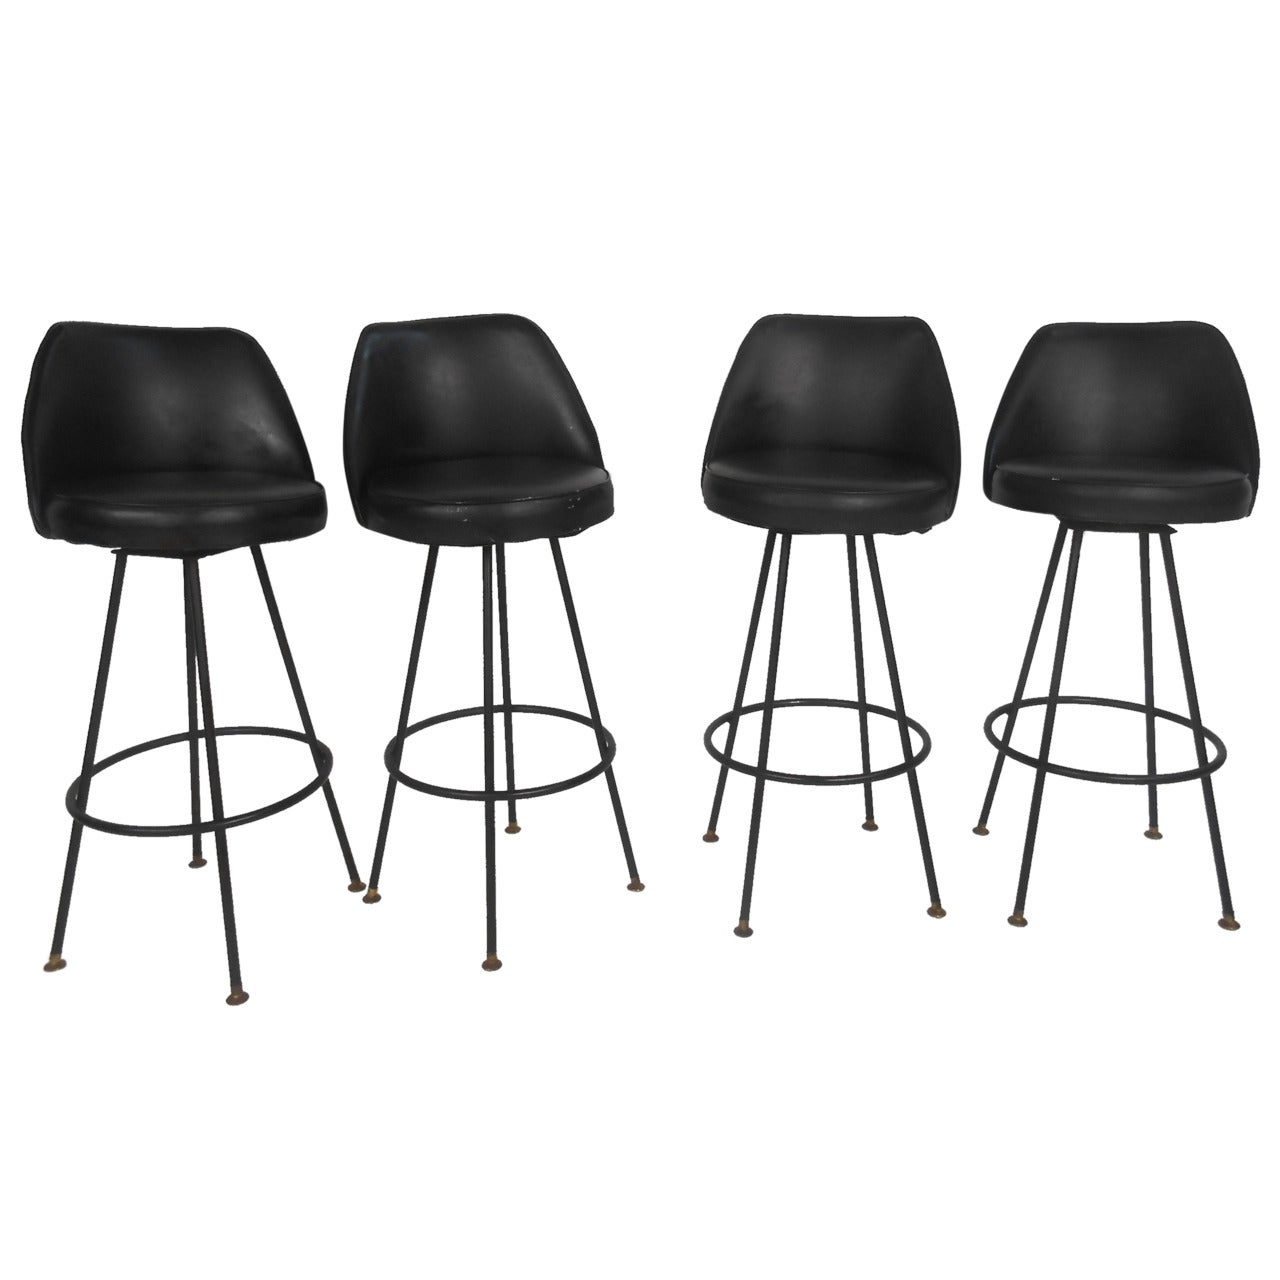 Four Mid-Century Modern Bar Stools by Admiral Chrome Corporation